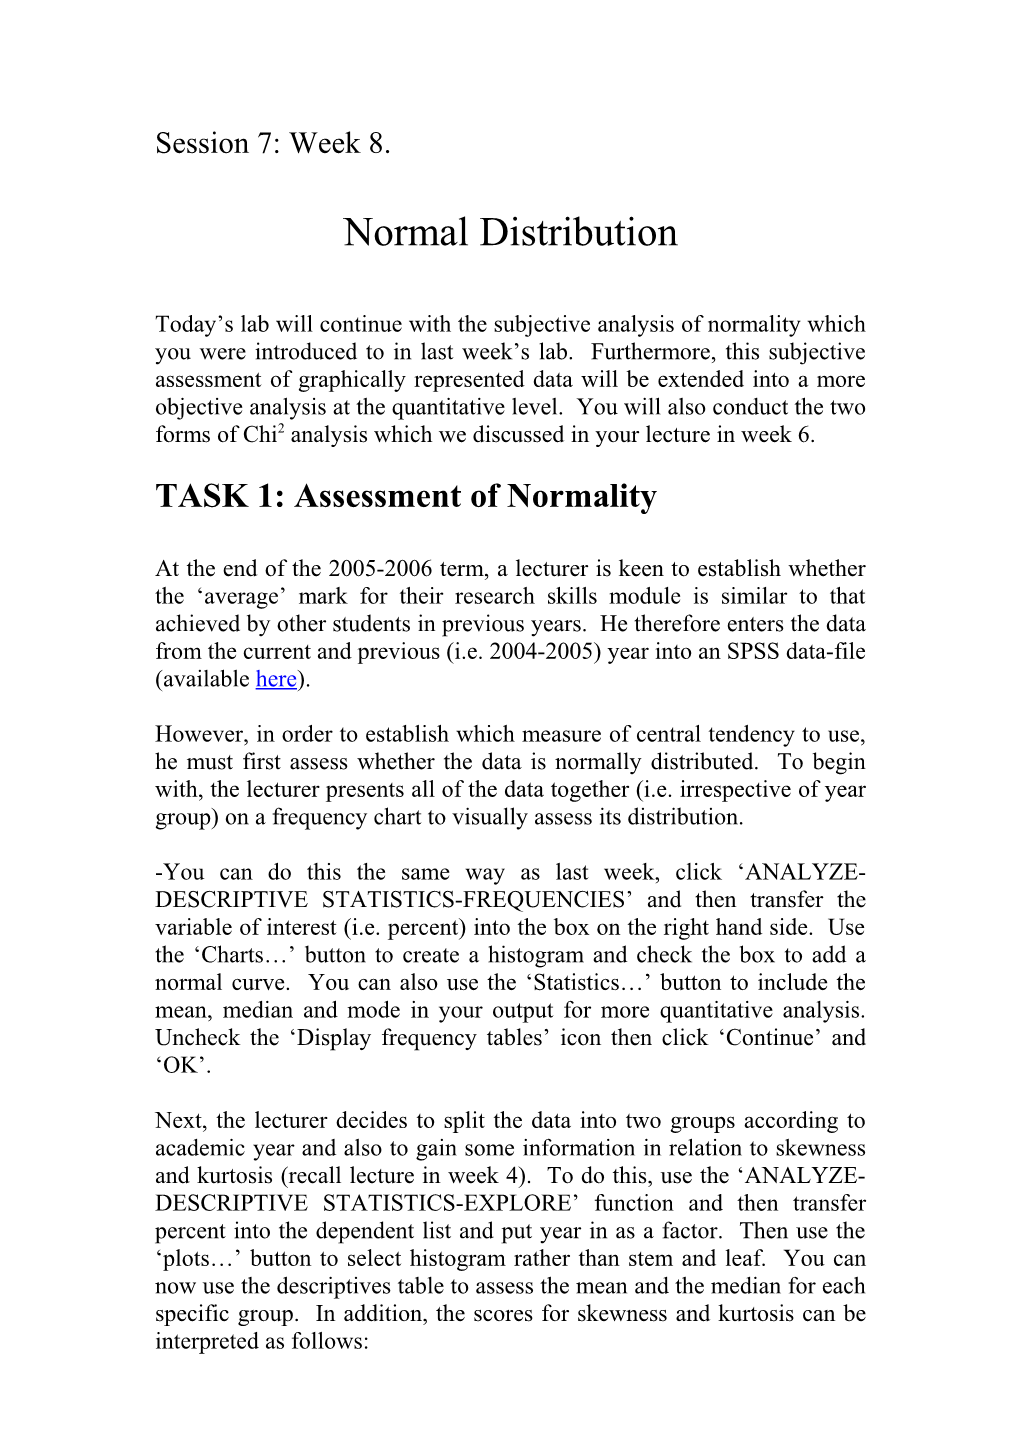 TASK 1: Assessment of Normality